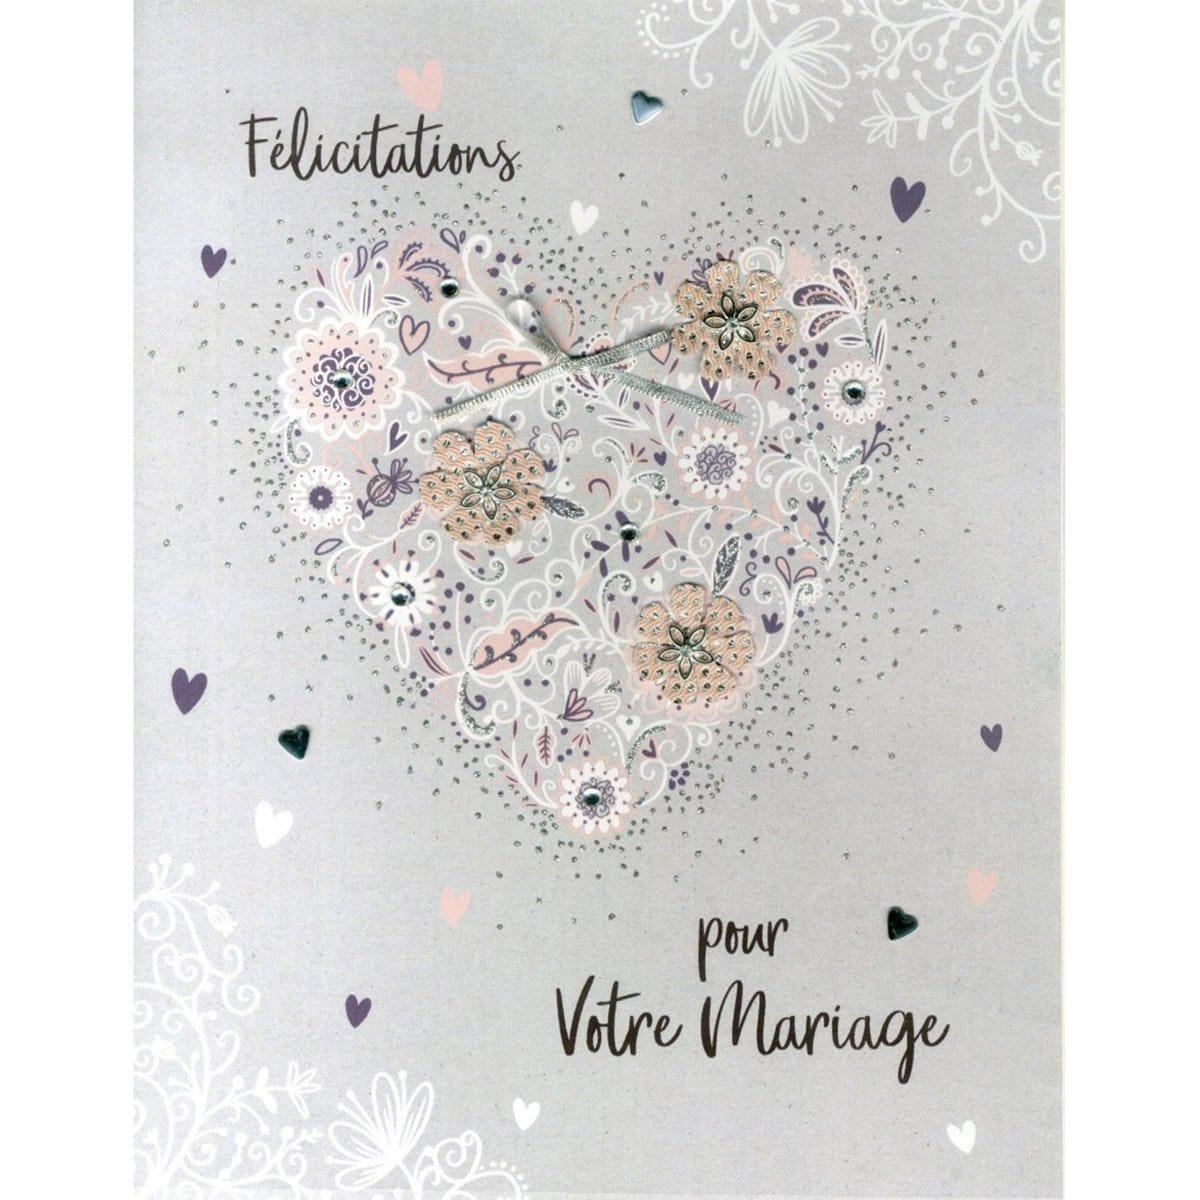 Buy Greeting Cards Gigantic Card - Mariage Heart sold at Party Expert